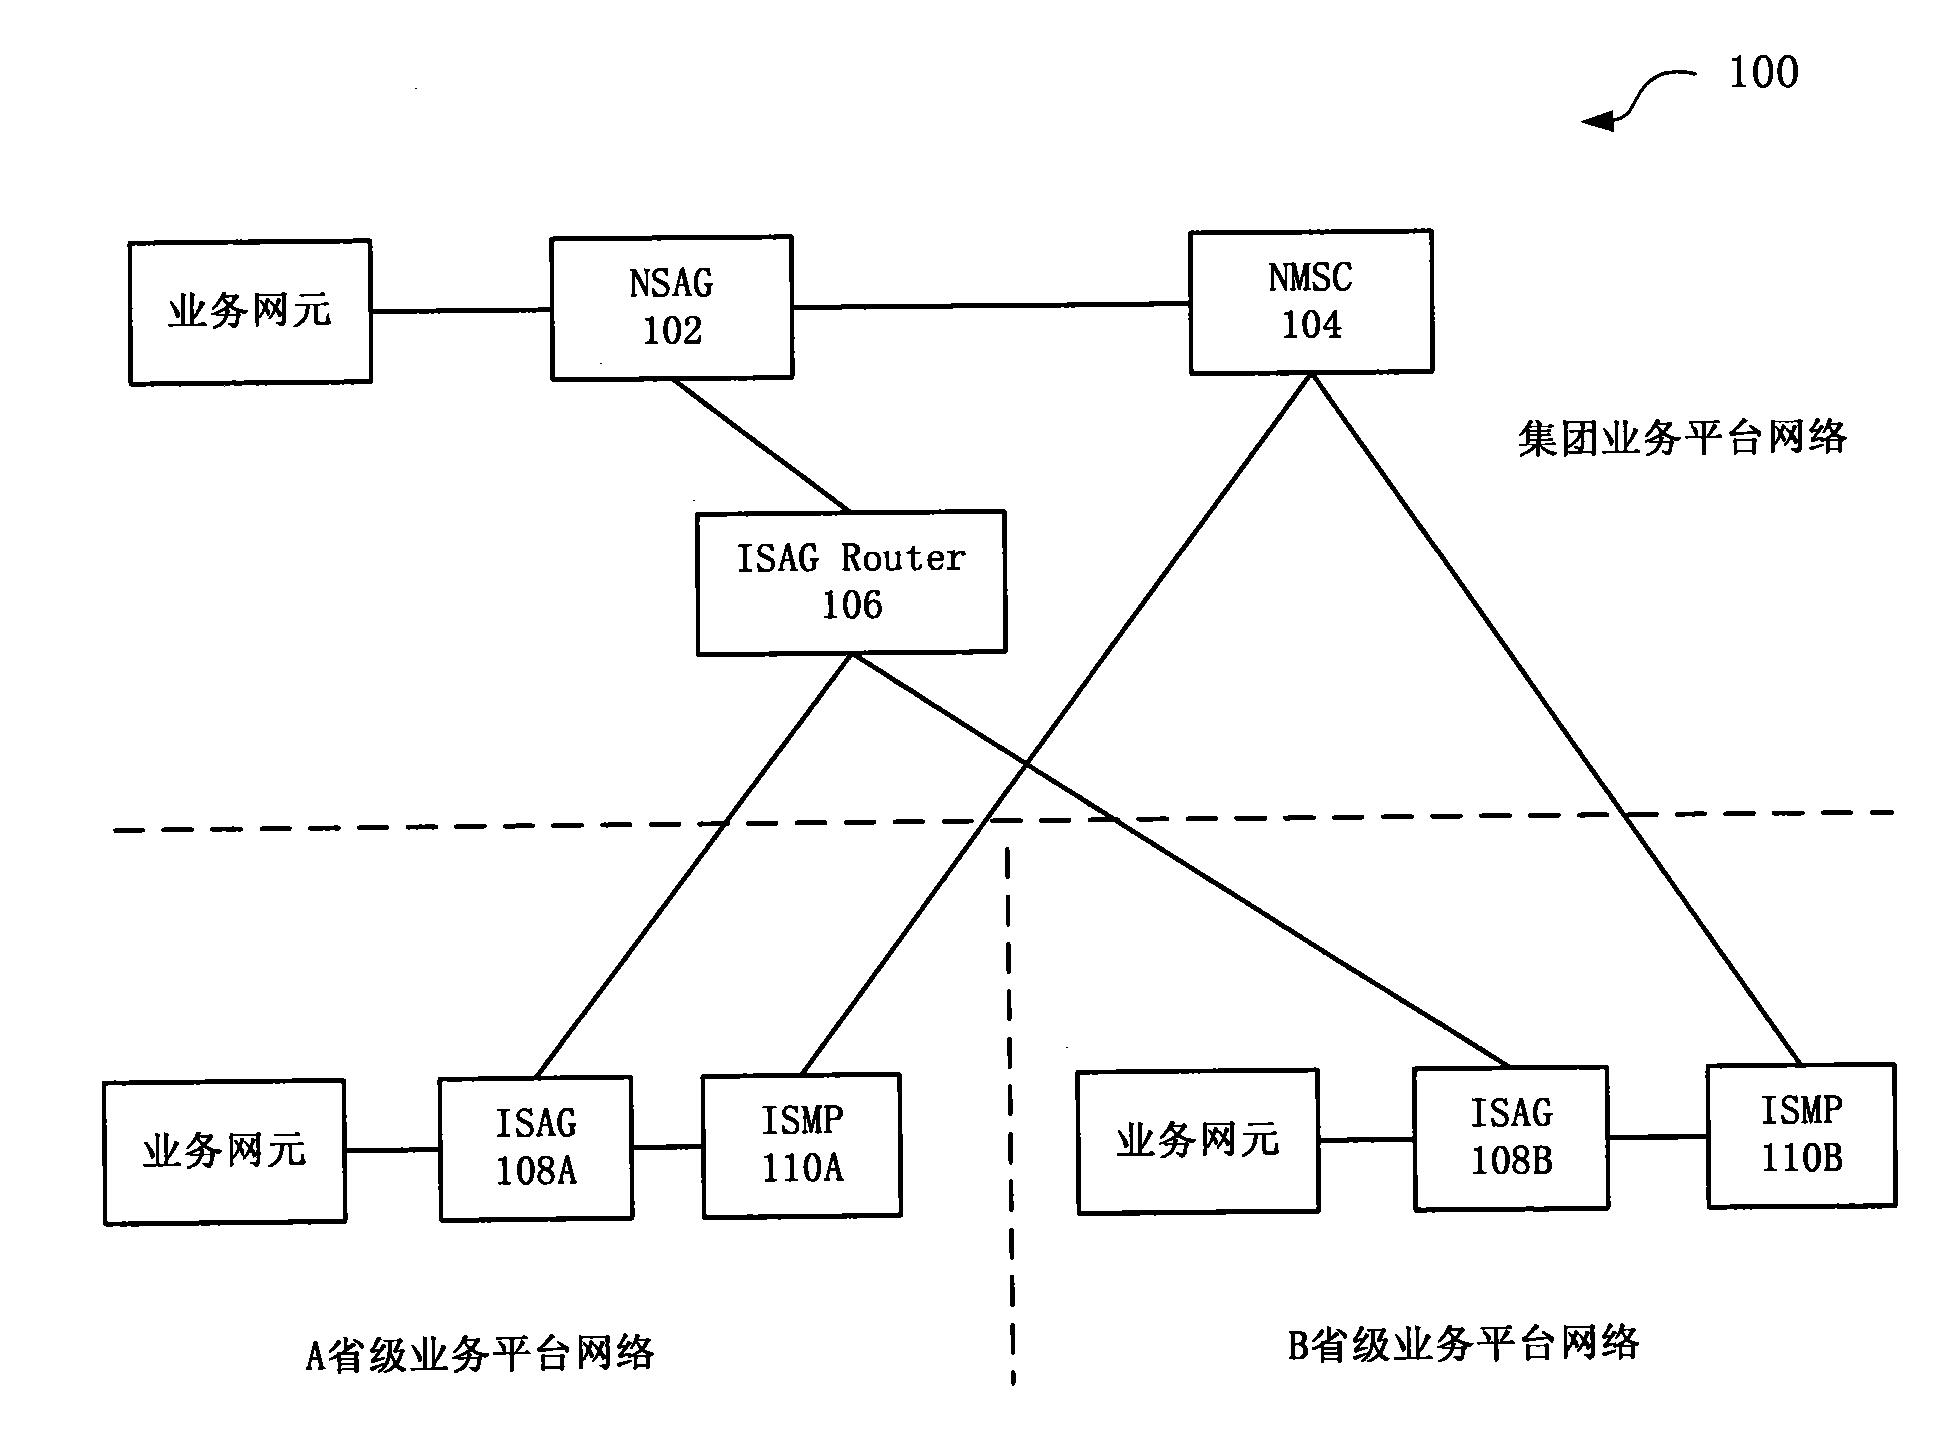 Network service monitoring system, and network service synchronization and running state monitoring methods